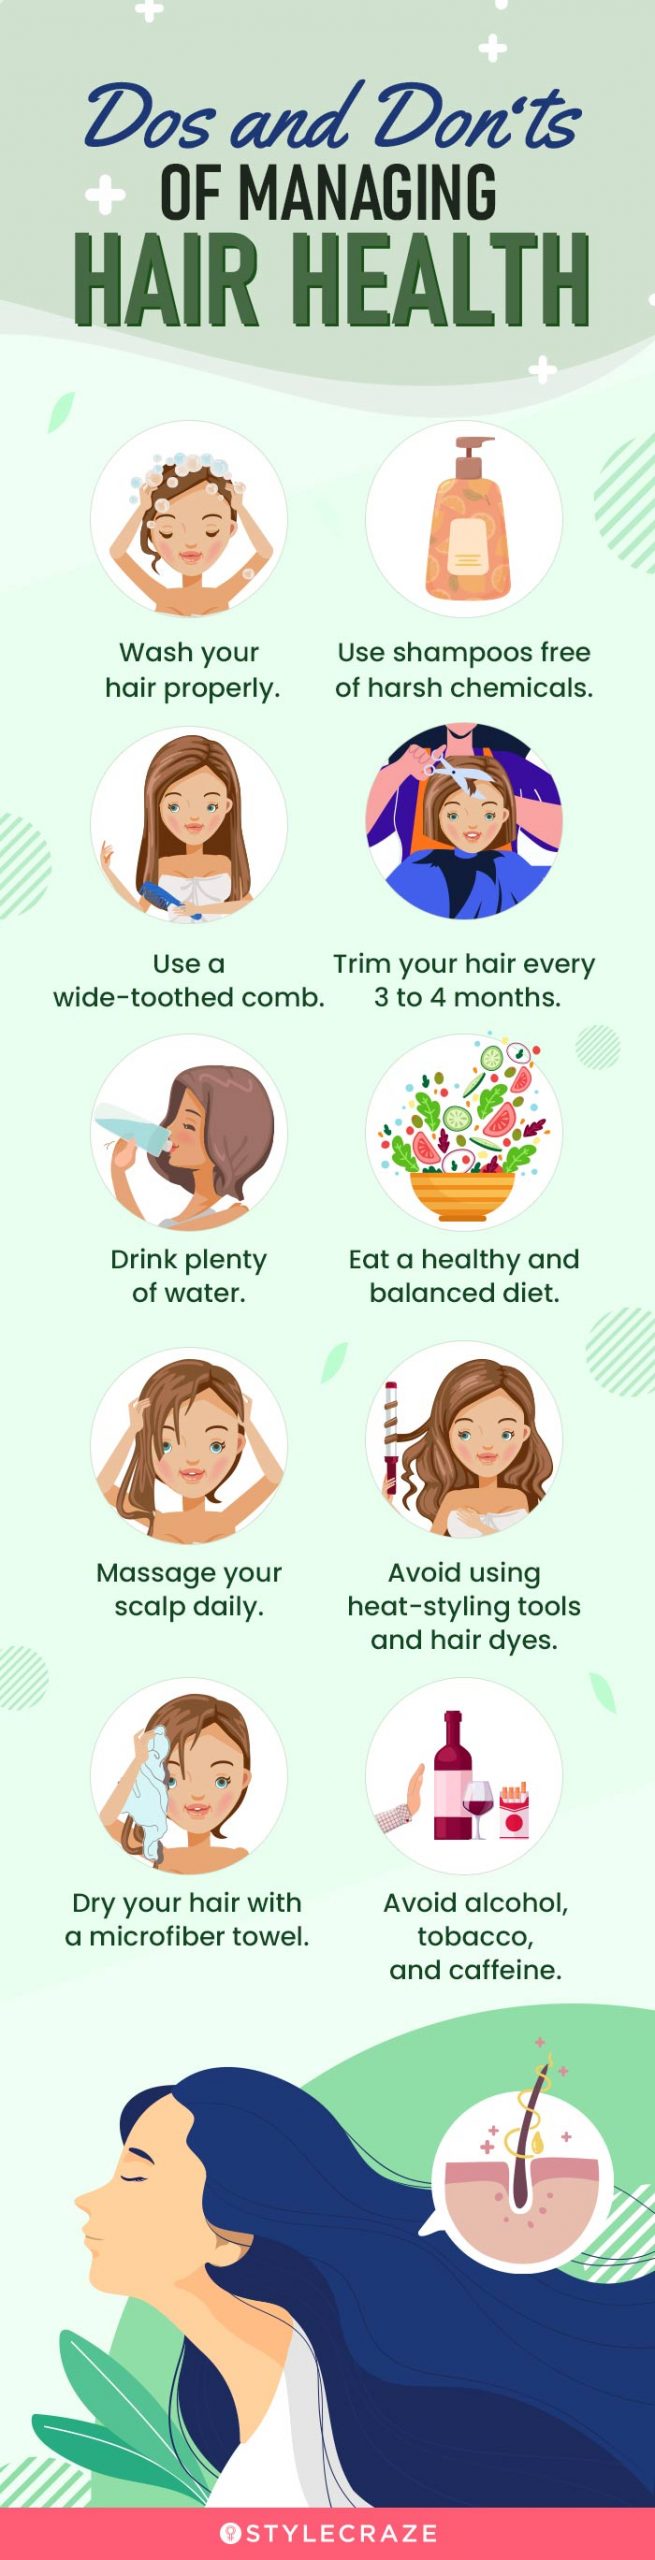 do's and don'ts of managing hair health [infographic]